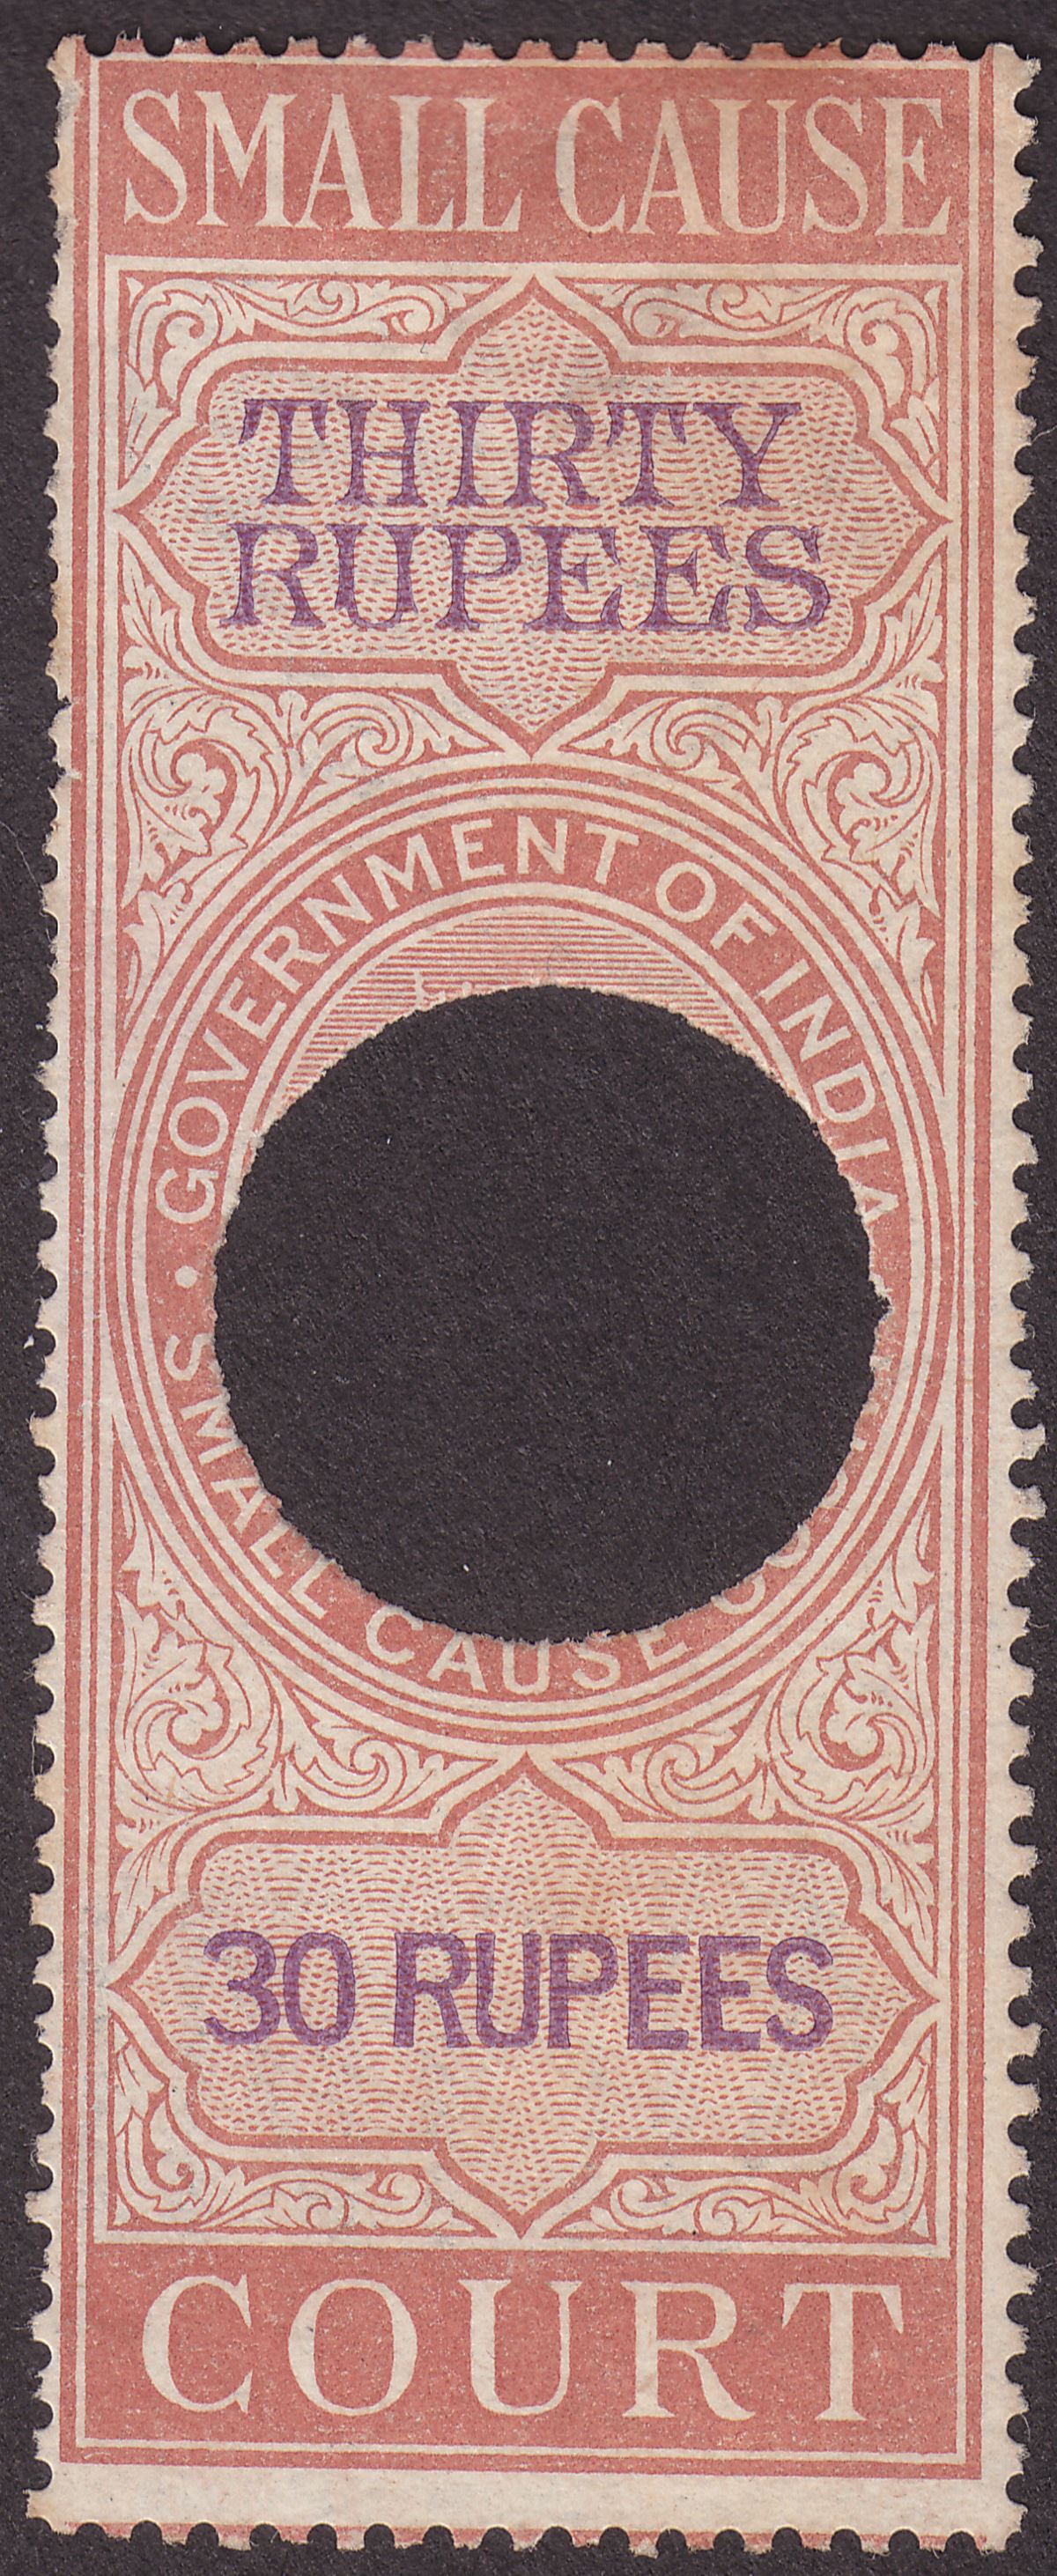 India 1868 QV Revenue Small Cause Court 30r Orange and Violet Used BF24